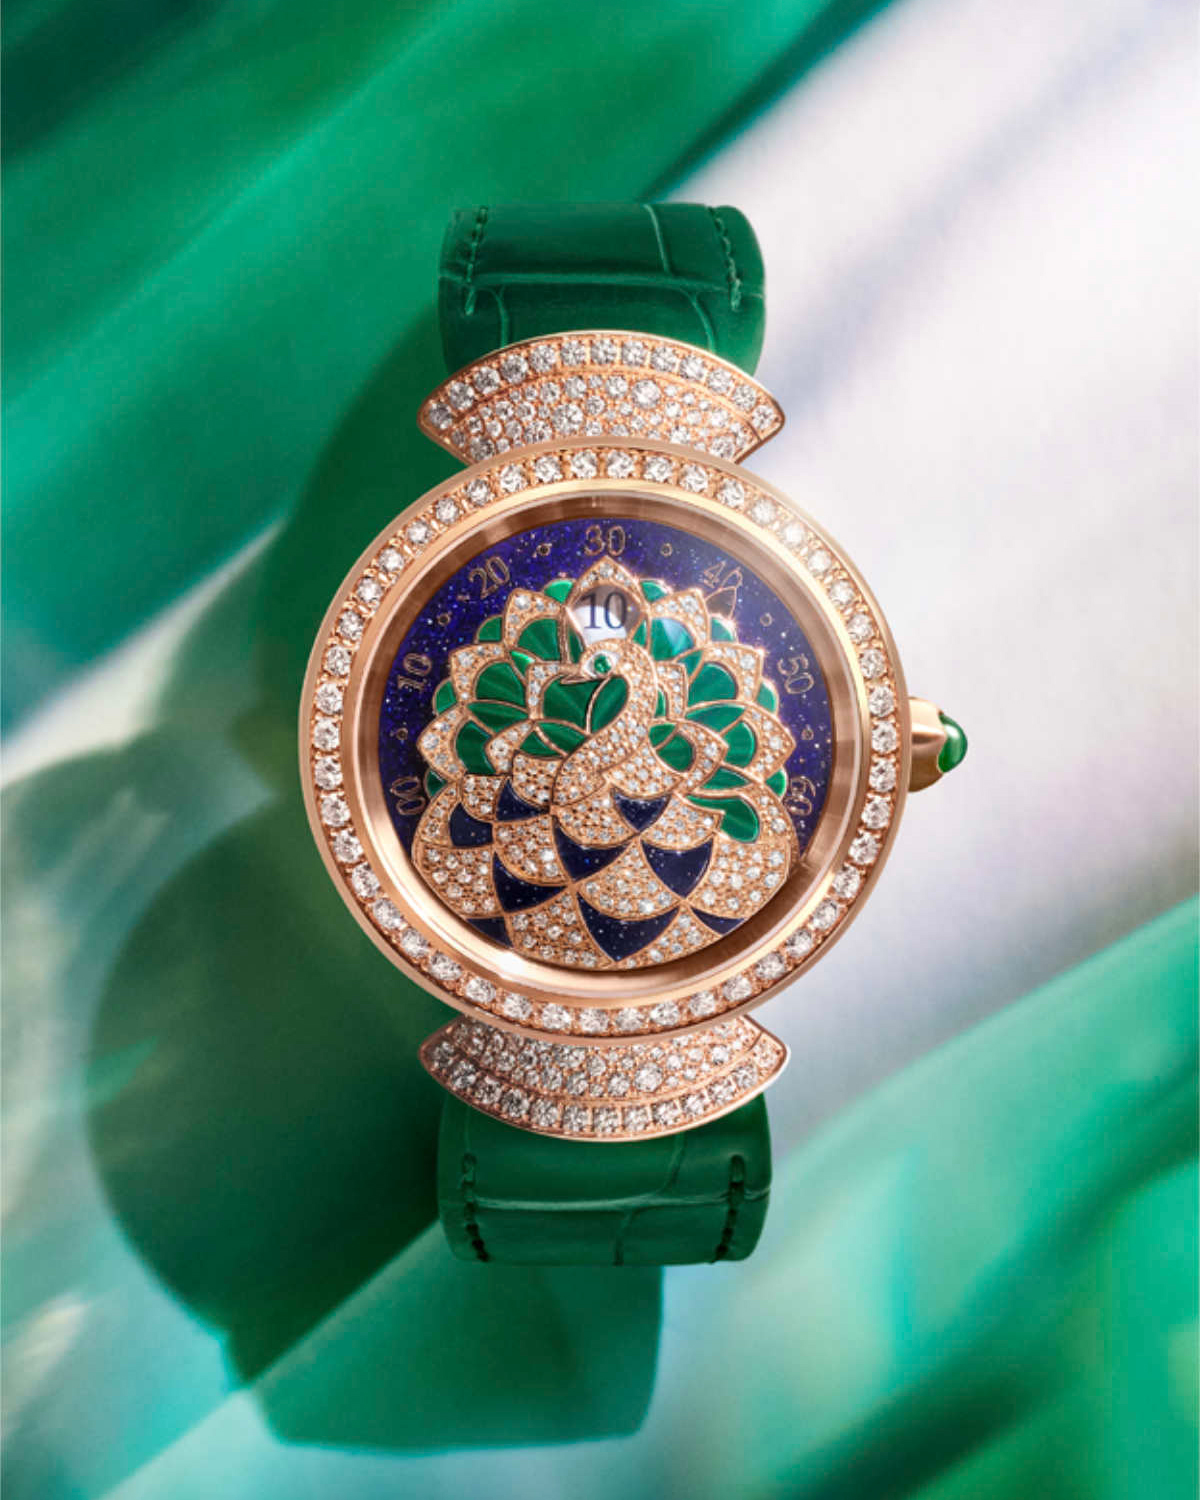 Cortina-Watch-Bvlgari-Divas-Dream-Peacock-Marquetry-Jumping-Hours-and-Retrograde-Minutes.